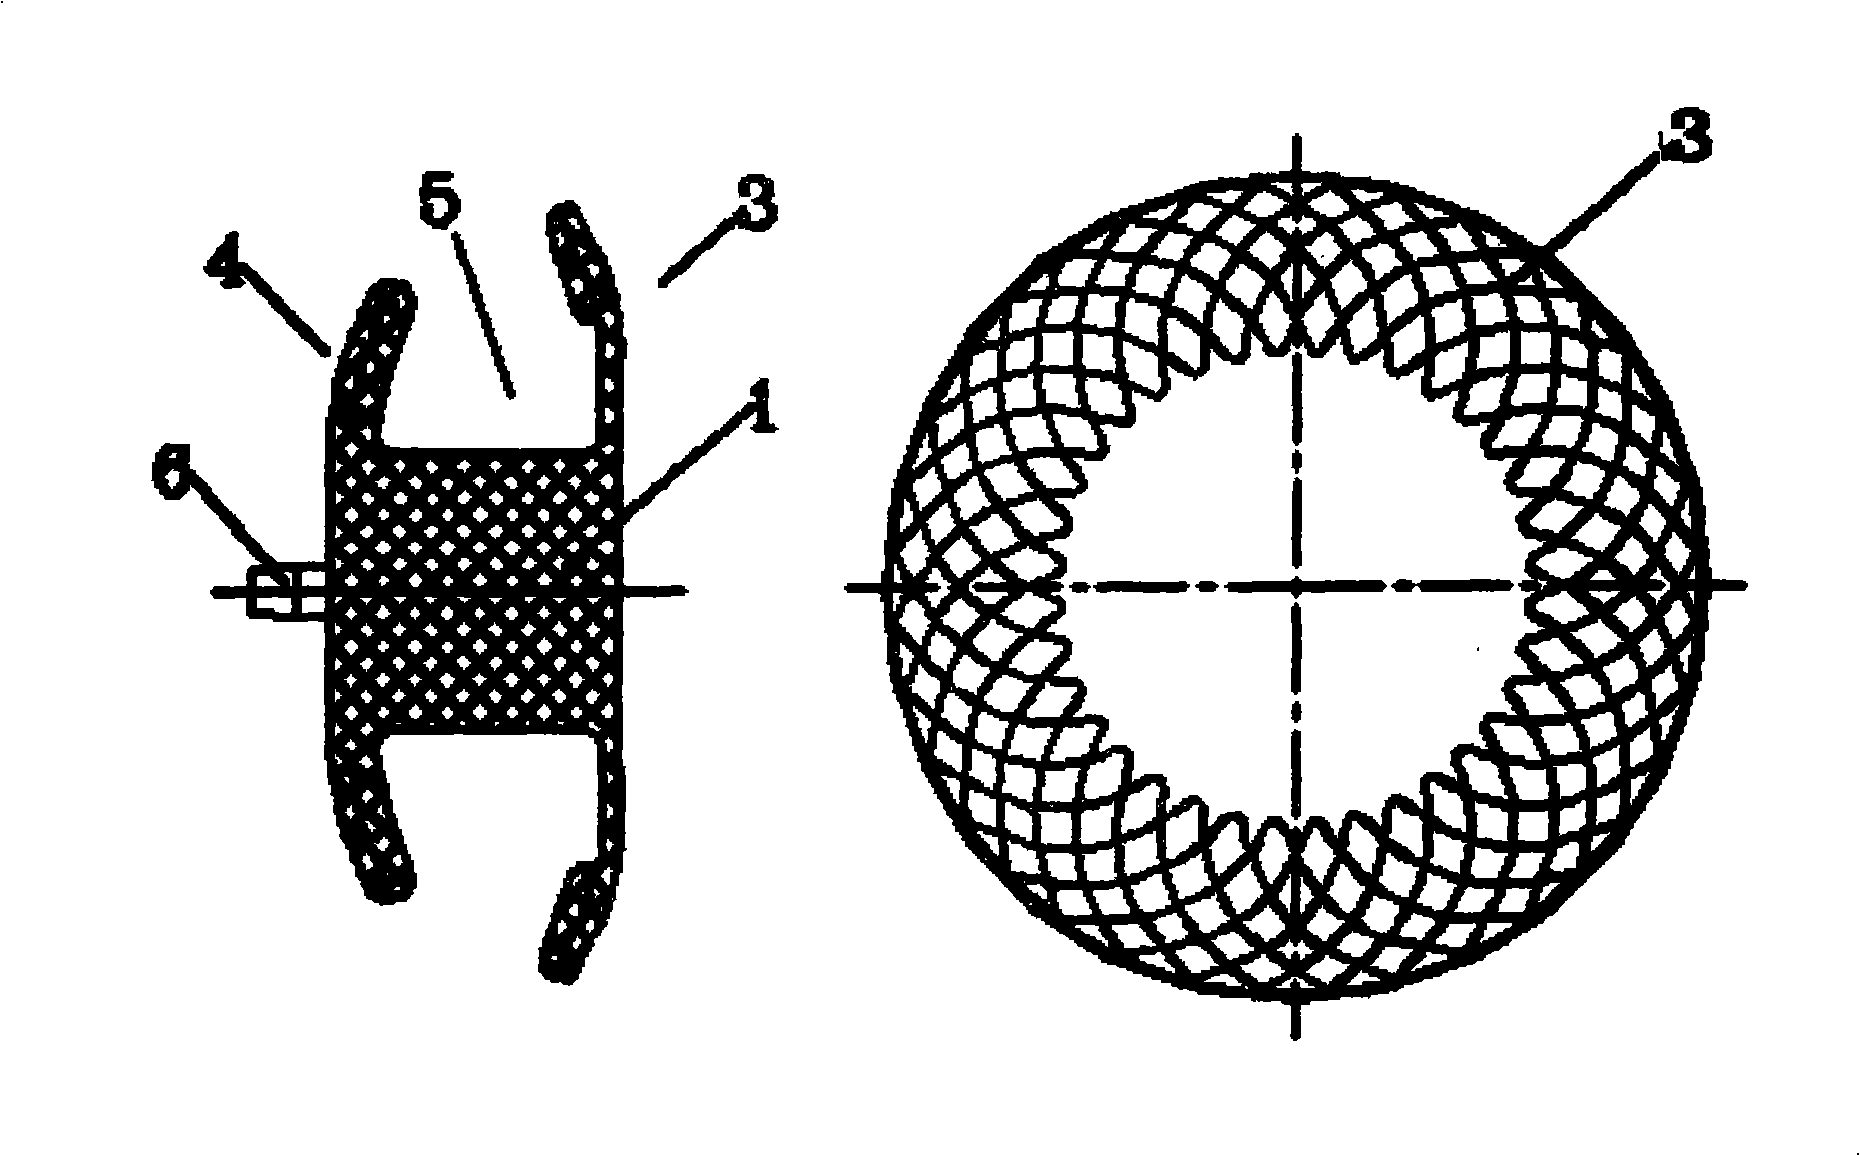 Blockage capable of reducing the thrombus source